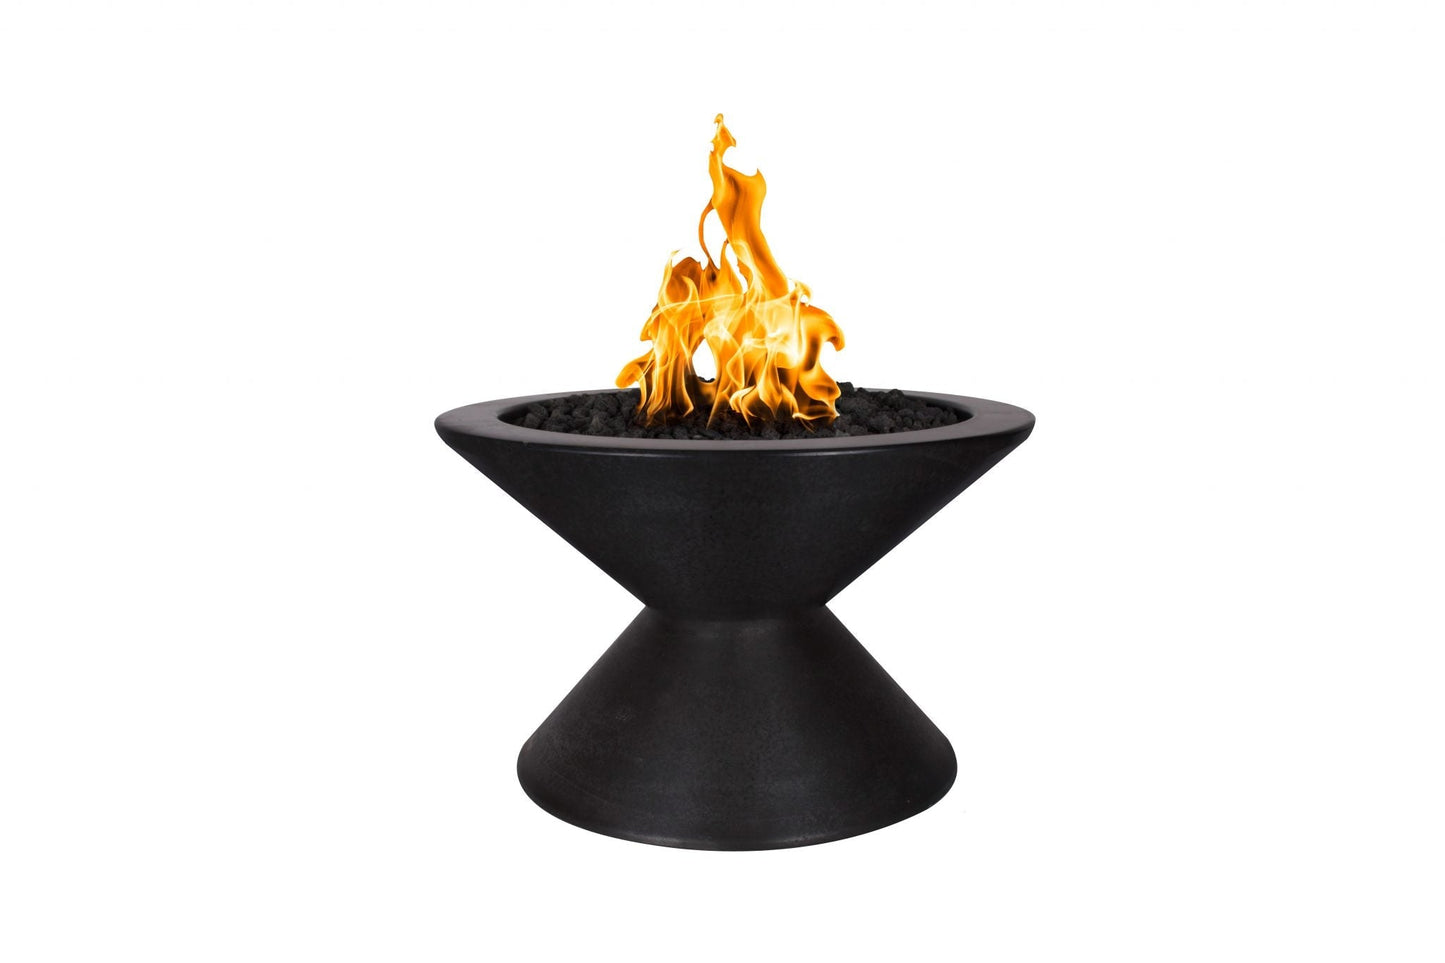 The Outdoor Plus Round Lucia 31" Metallic Copper GFRC Concrete Liquid Propane Fire Pit with 12V Electronic Ignition